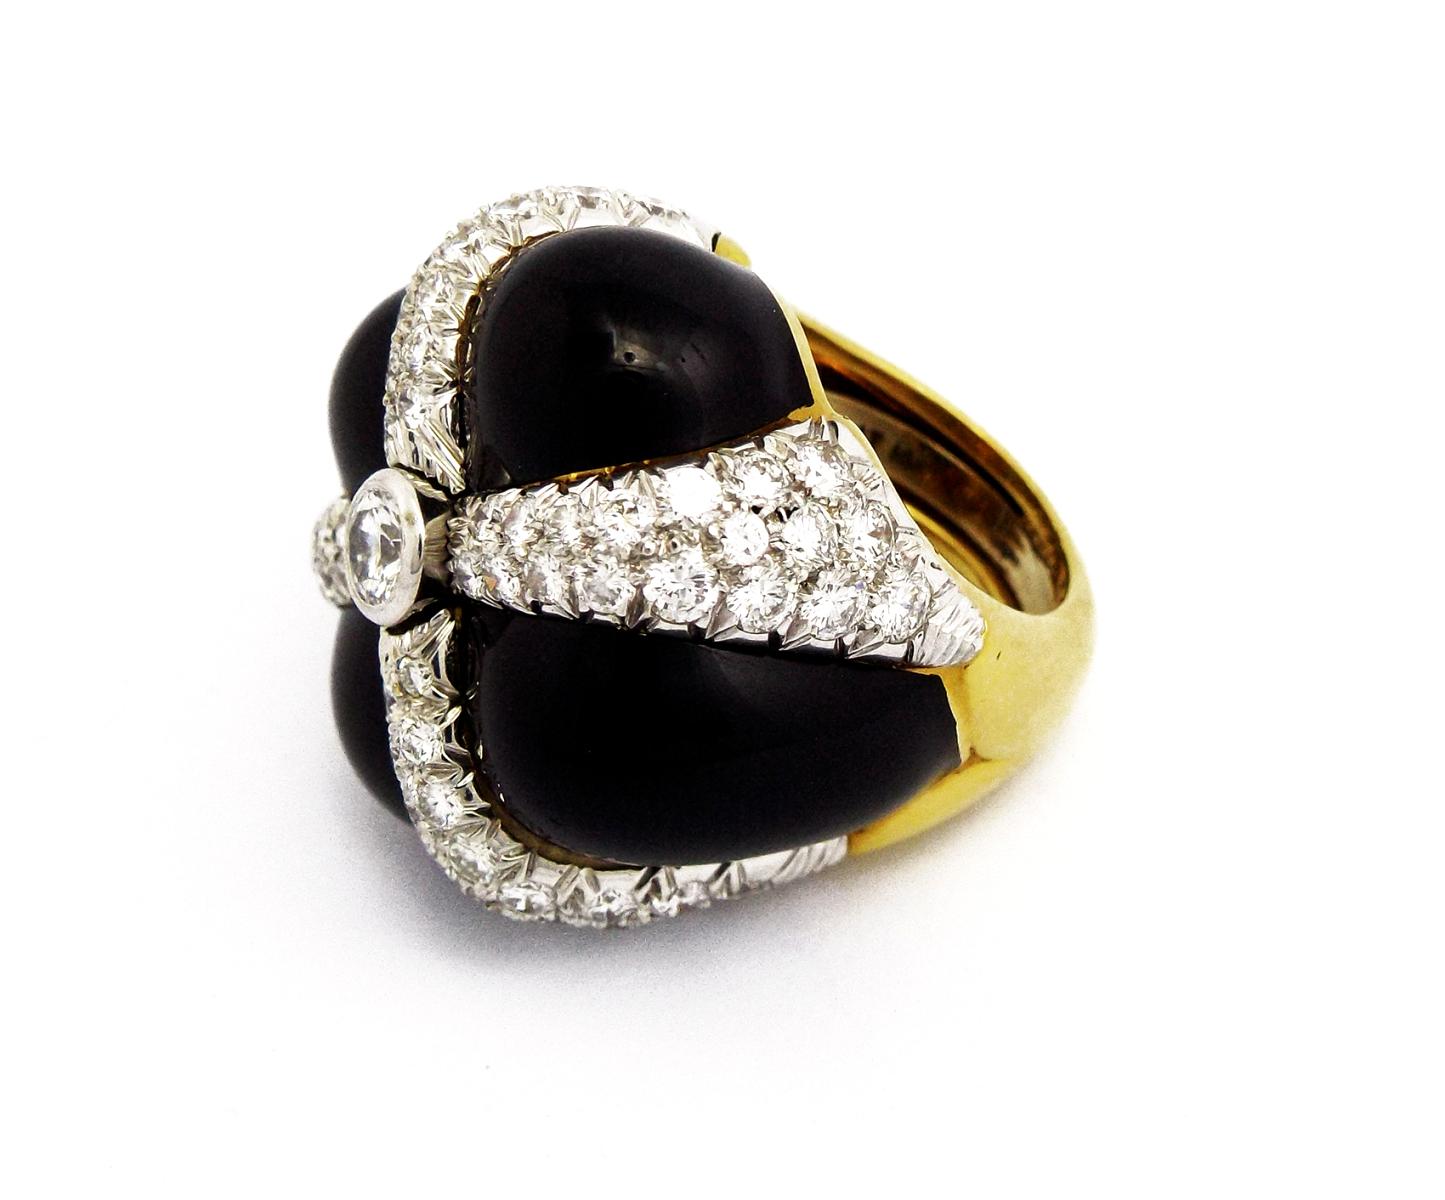 Of bombé design, the alternating black enamel plaque, with circular-cut diamond detail, centering upon a collet-set circular-cut diamond, ring size 6 1/4, has an inner horse shoe for easy downsizing, mounted in platinum and 18k gold. Signed Webb for